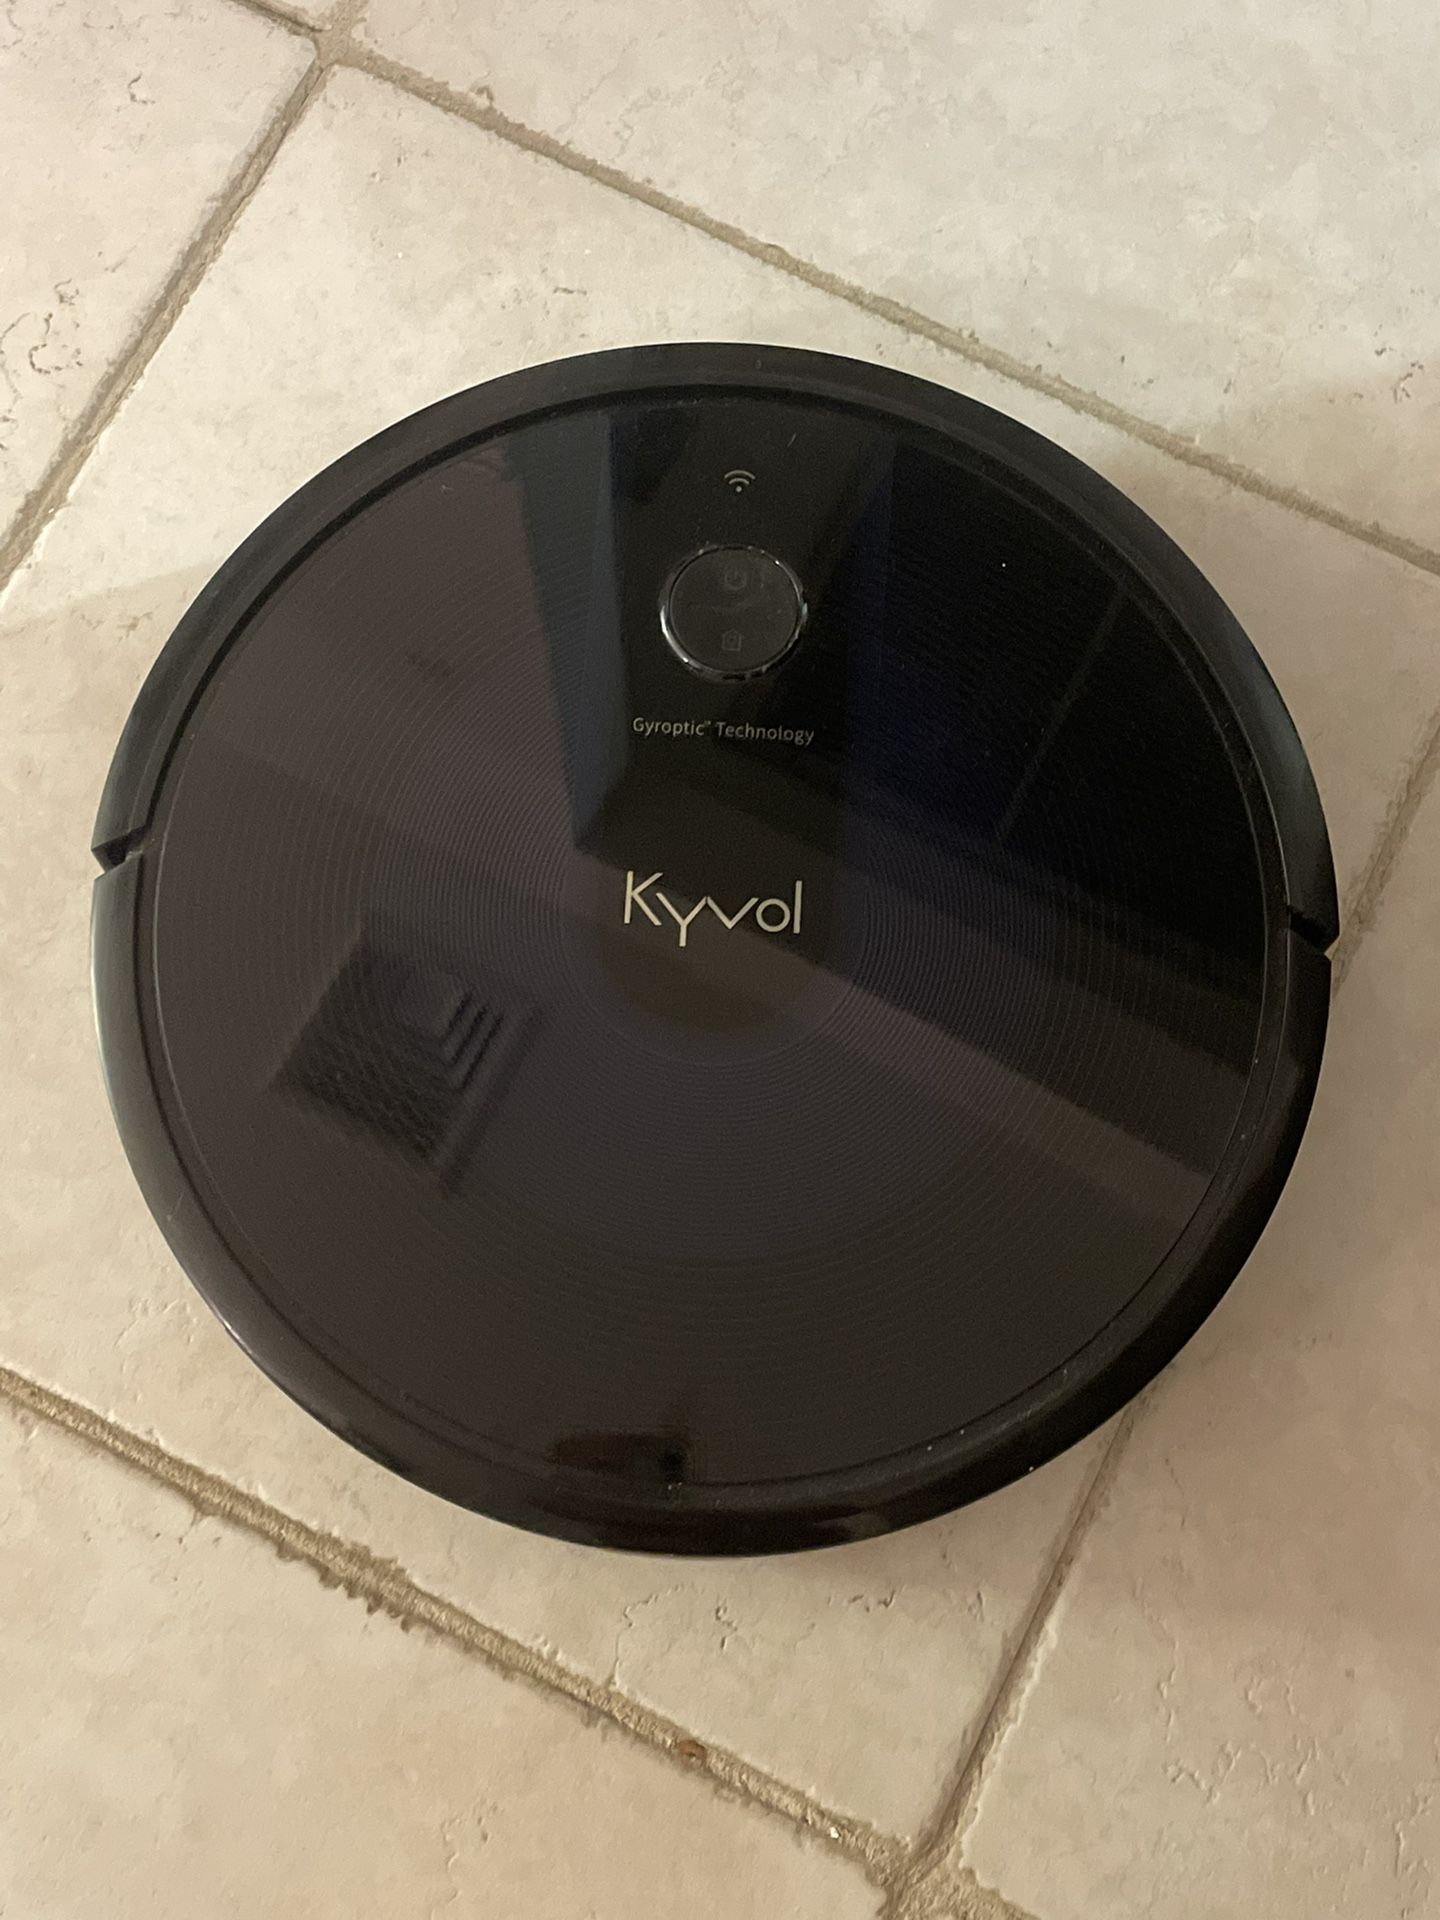 KYVOL CYBOVAC E31 WI-FI CONNECTED VACUUM & MOPPING ROBOT